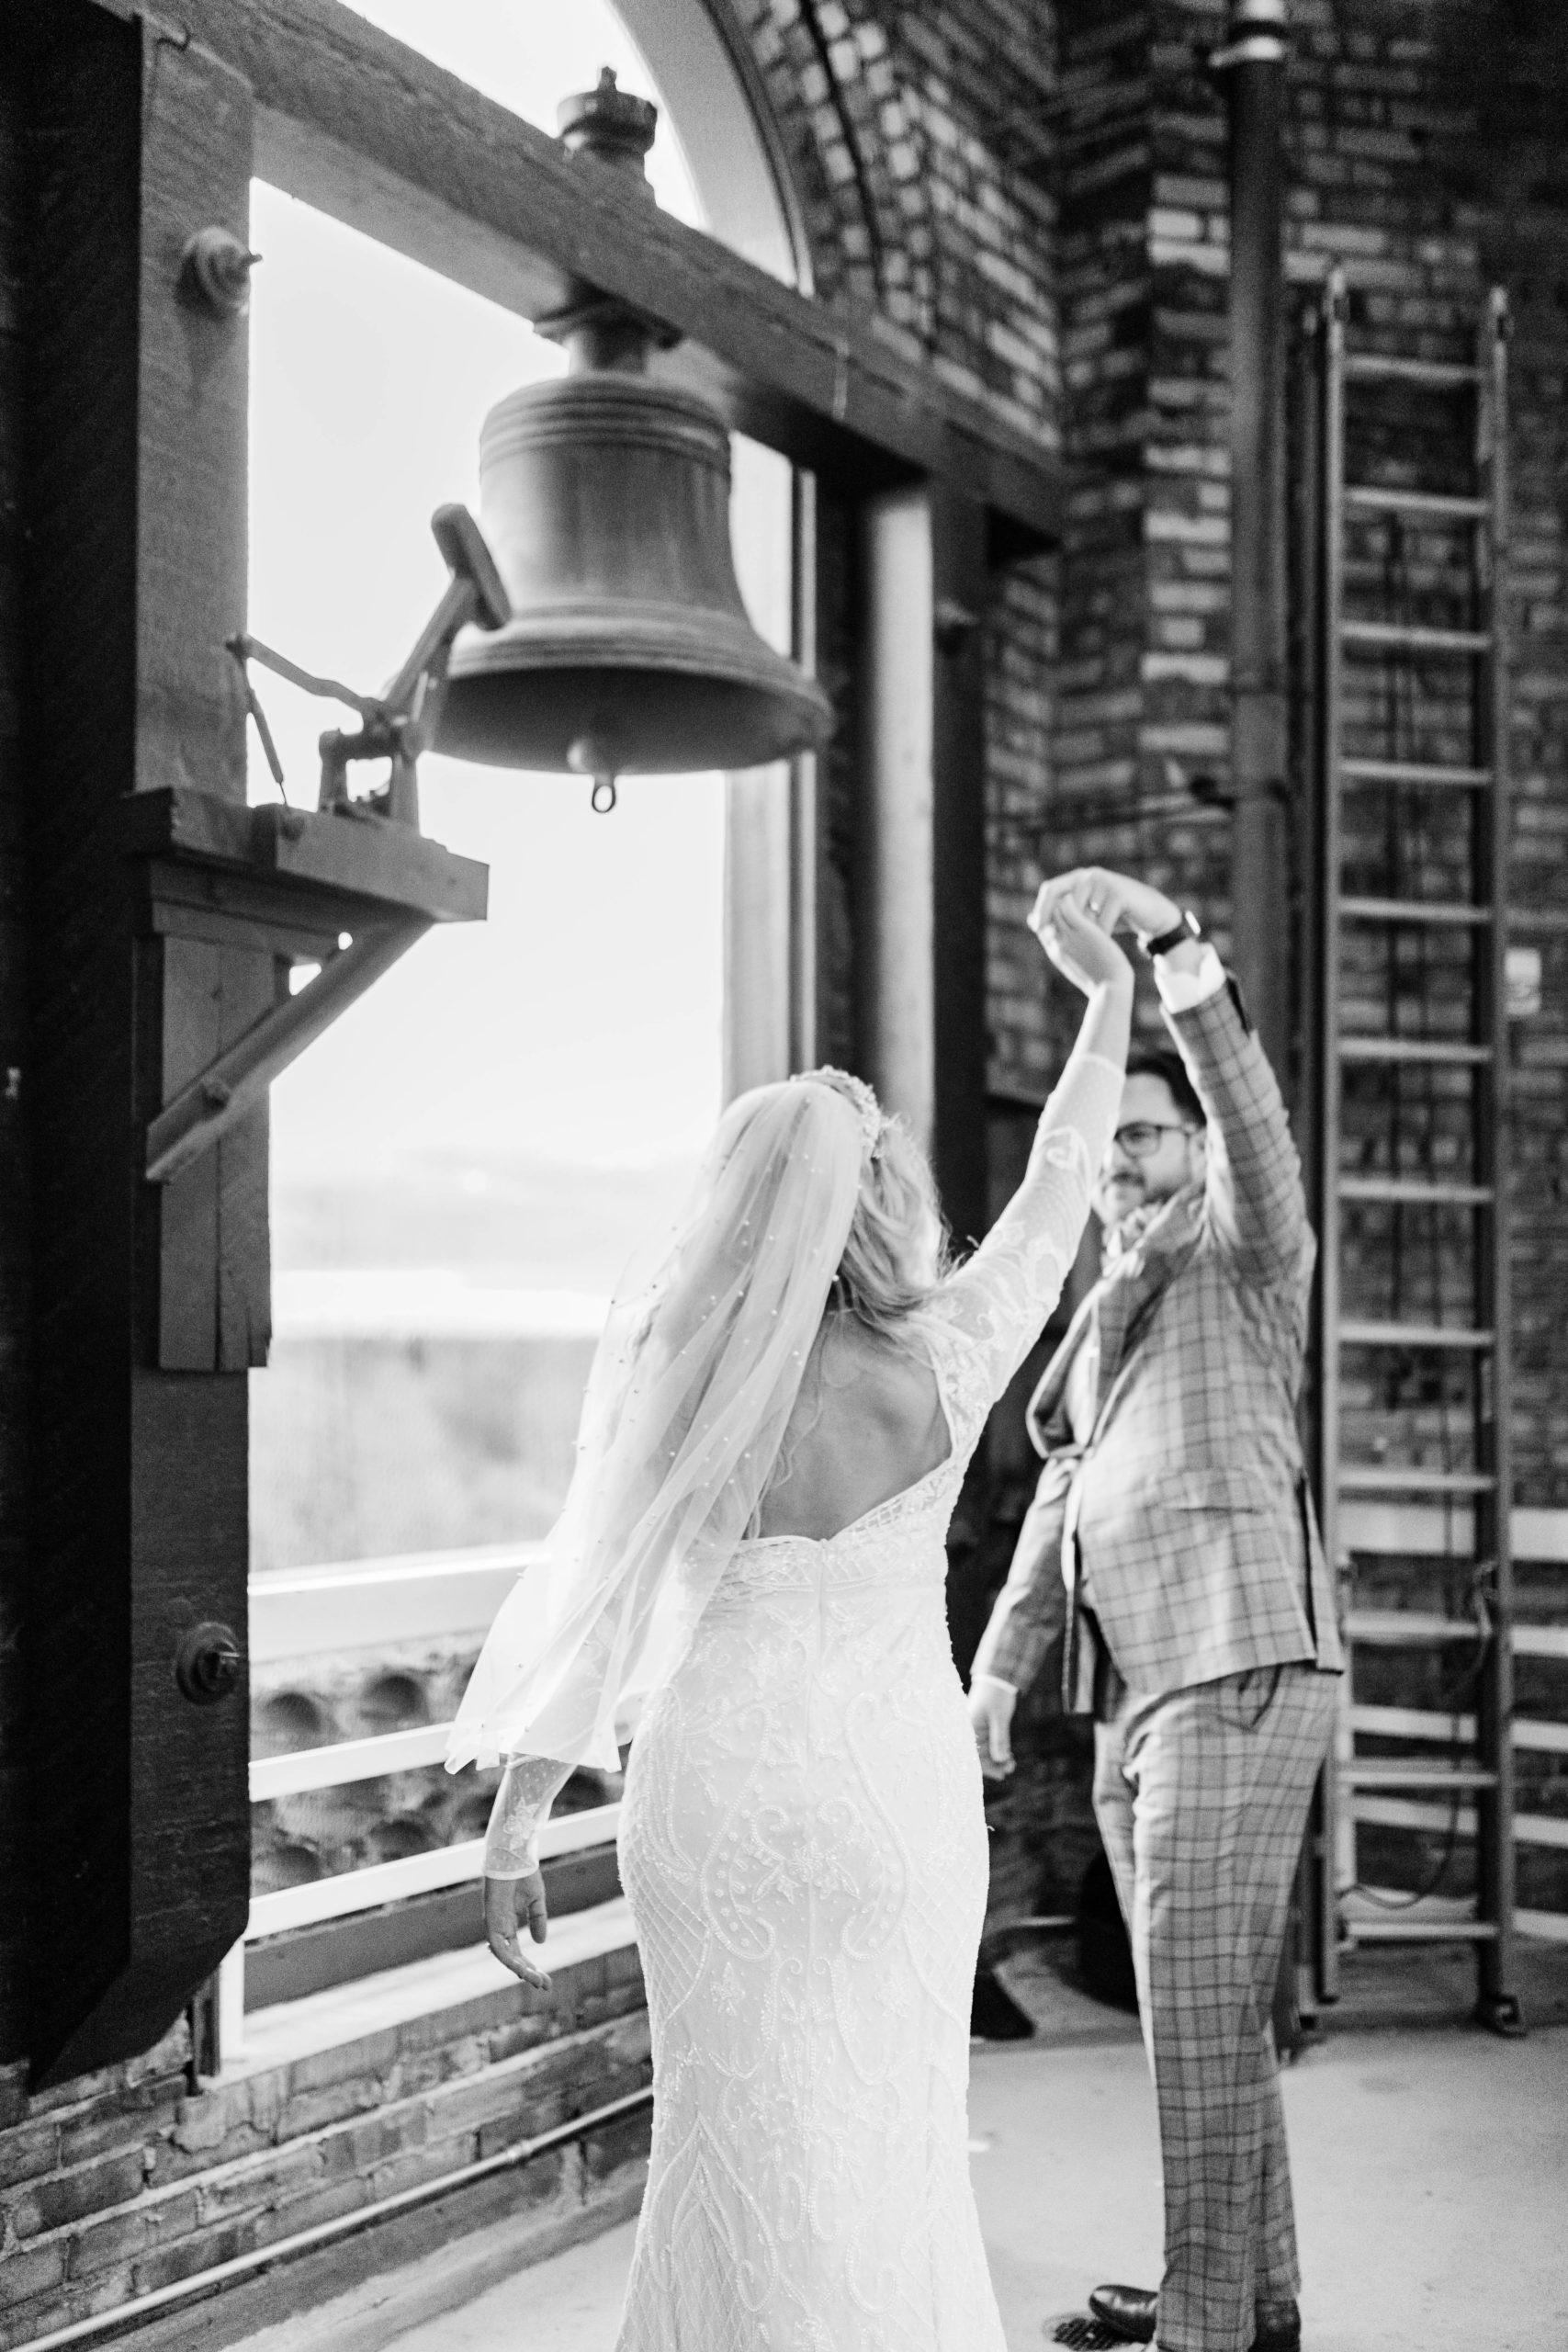 black and white wedding photo of bride and groom sitting together and laughing